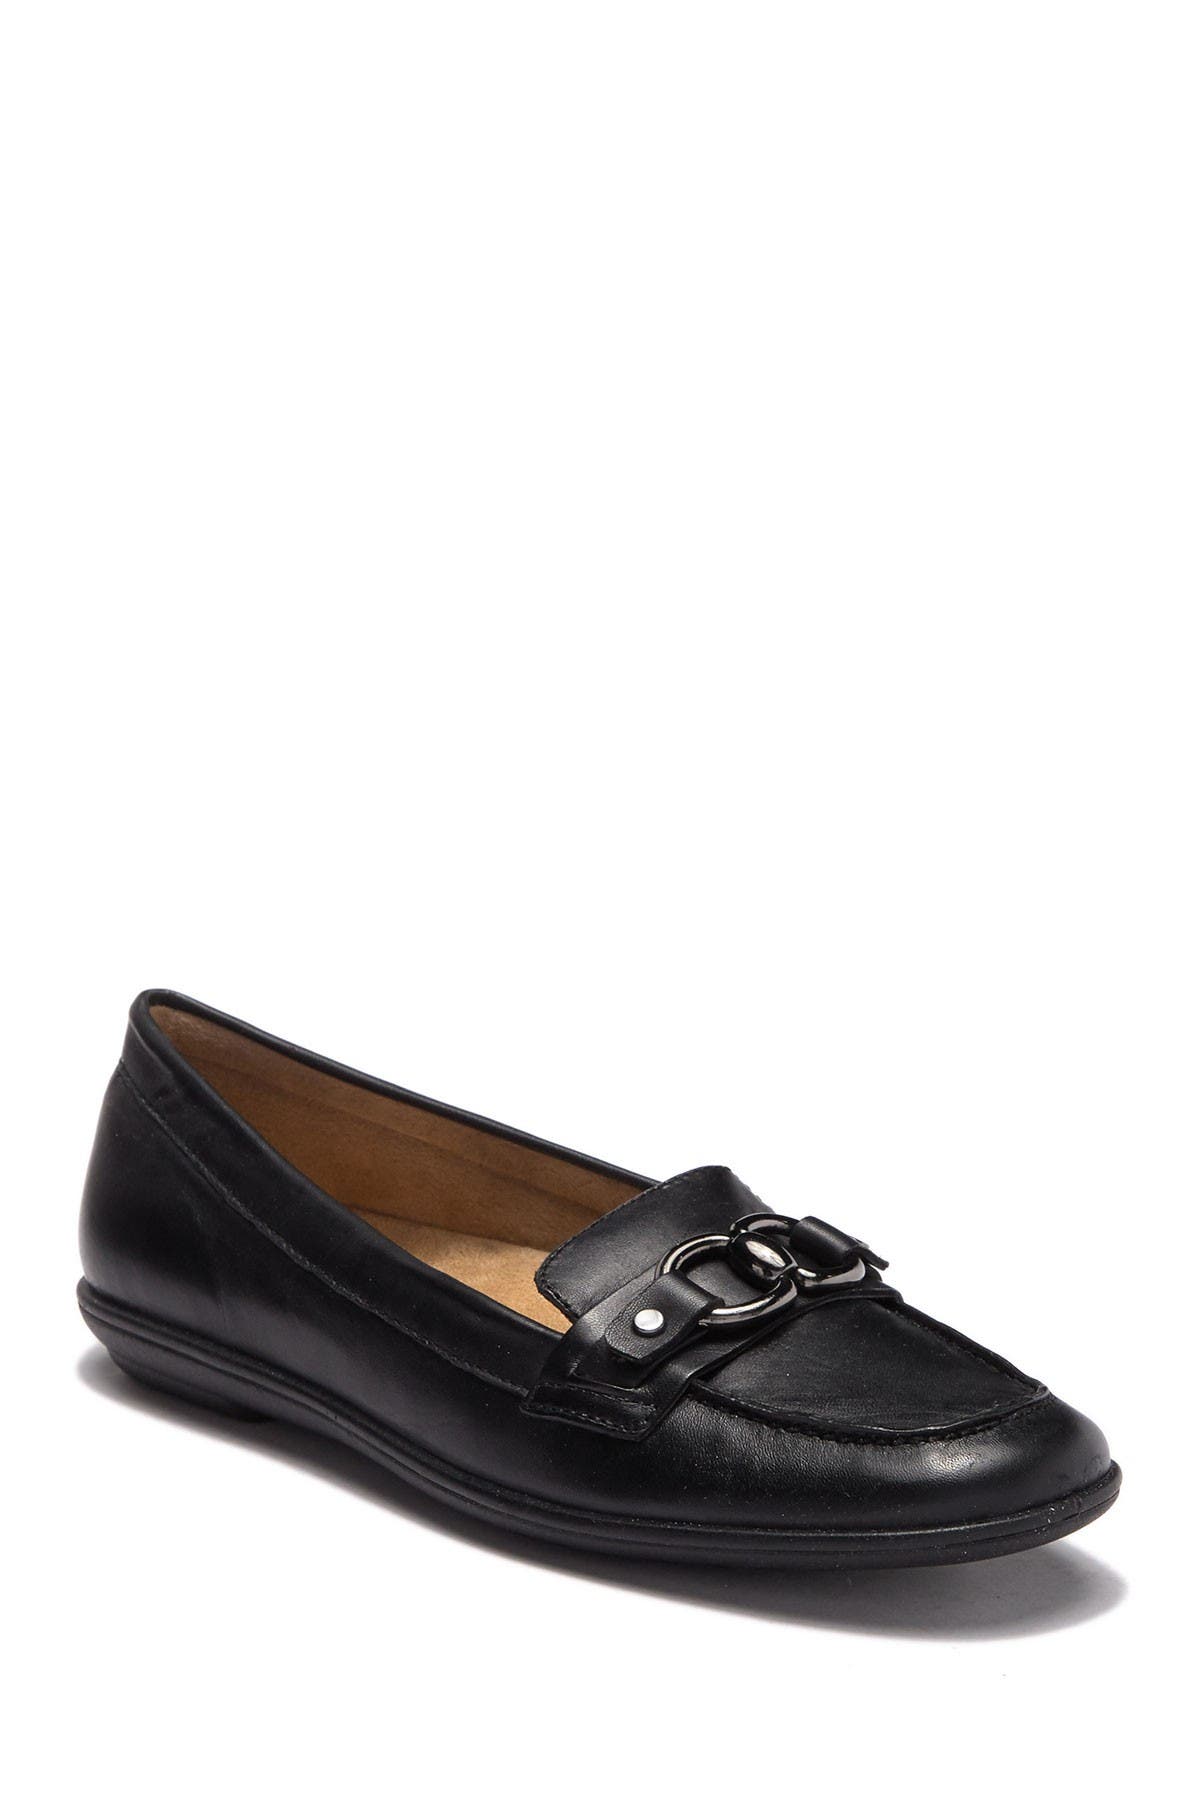 Naturalizer | Ainsley Loafer - Wide 